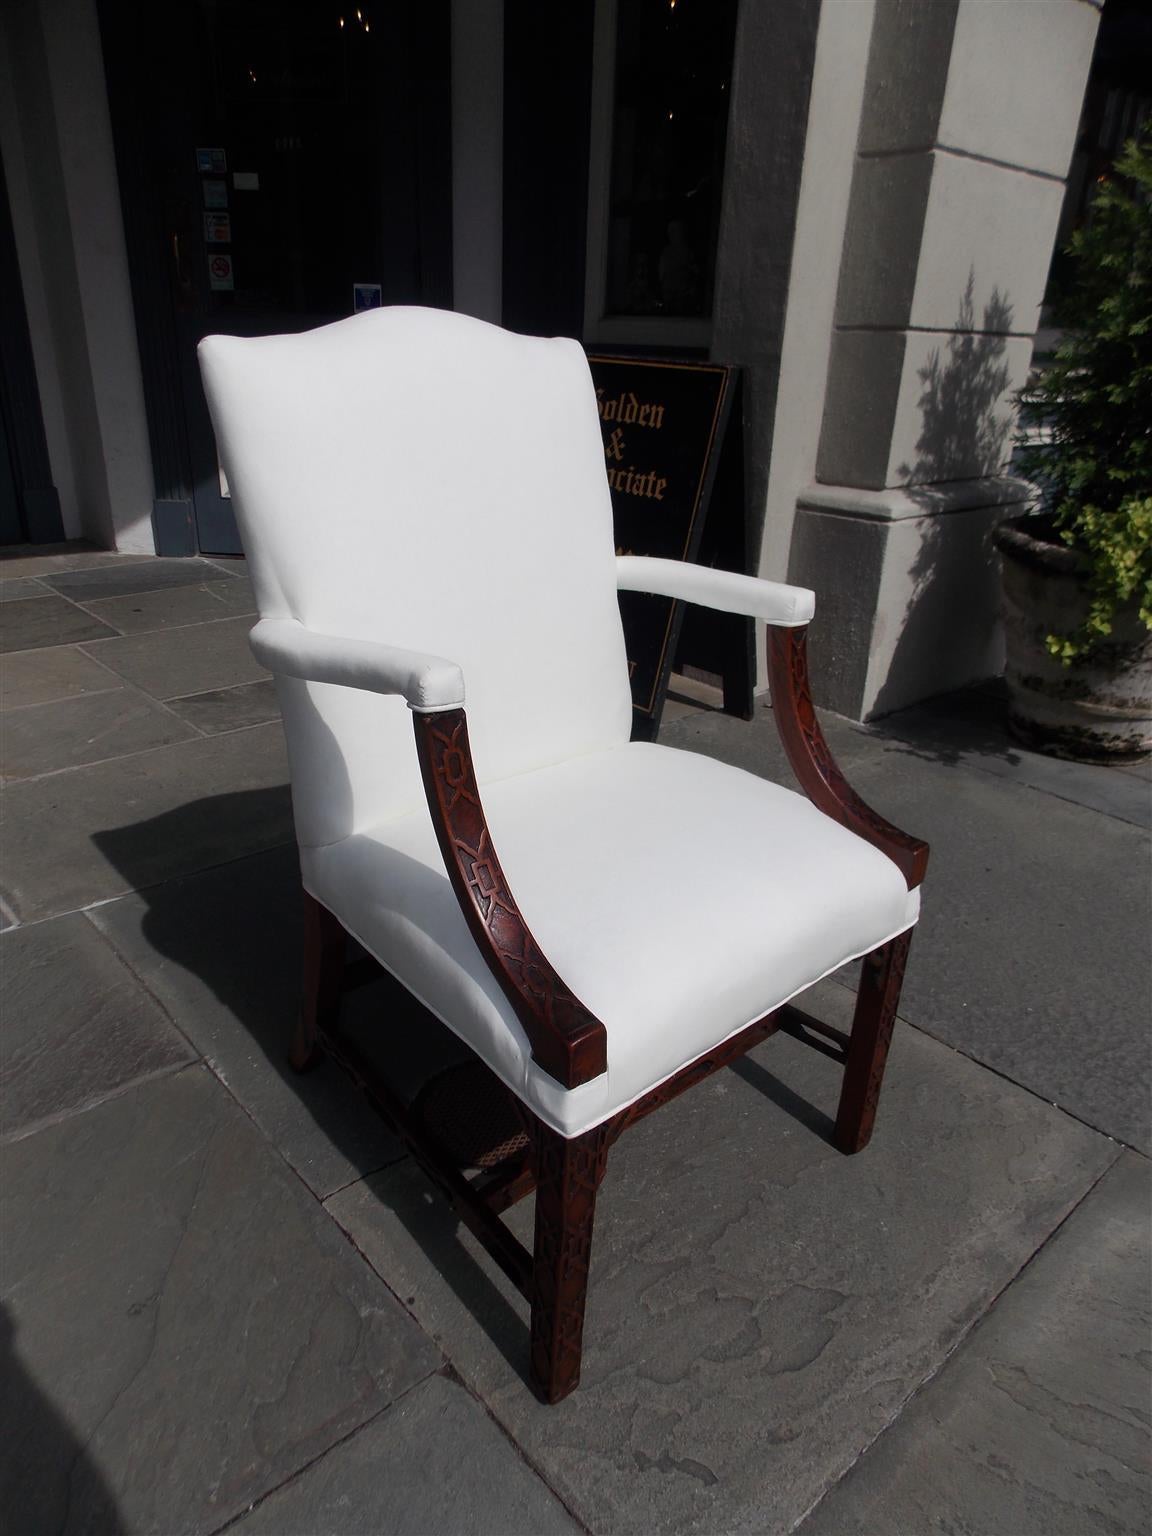 English Chinese Chippendale mahogany armchair with serpentine back, scrolled arms, intricately carved fret work, cross stretchers, and terminating on squared legs. Chair is upholstered in white muslin and retains the original horse hair, Late 18th